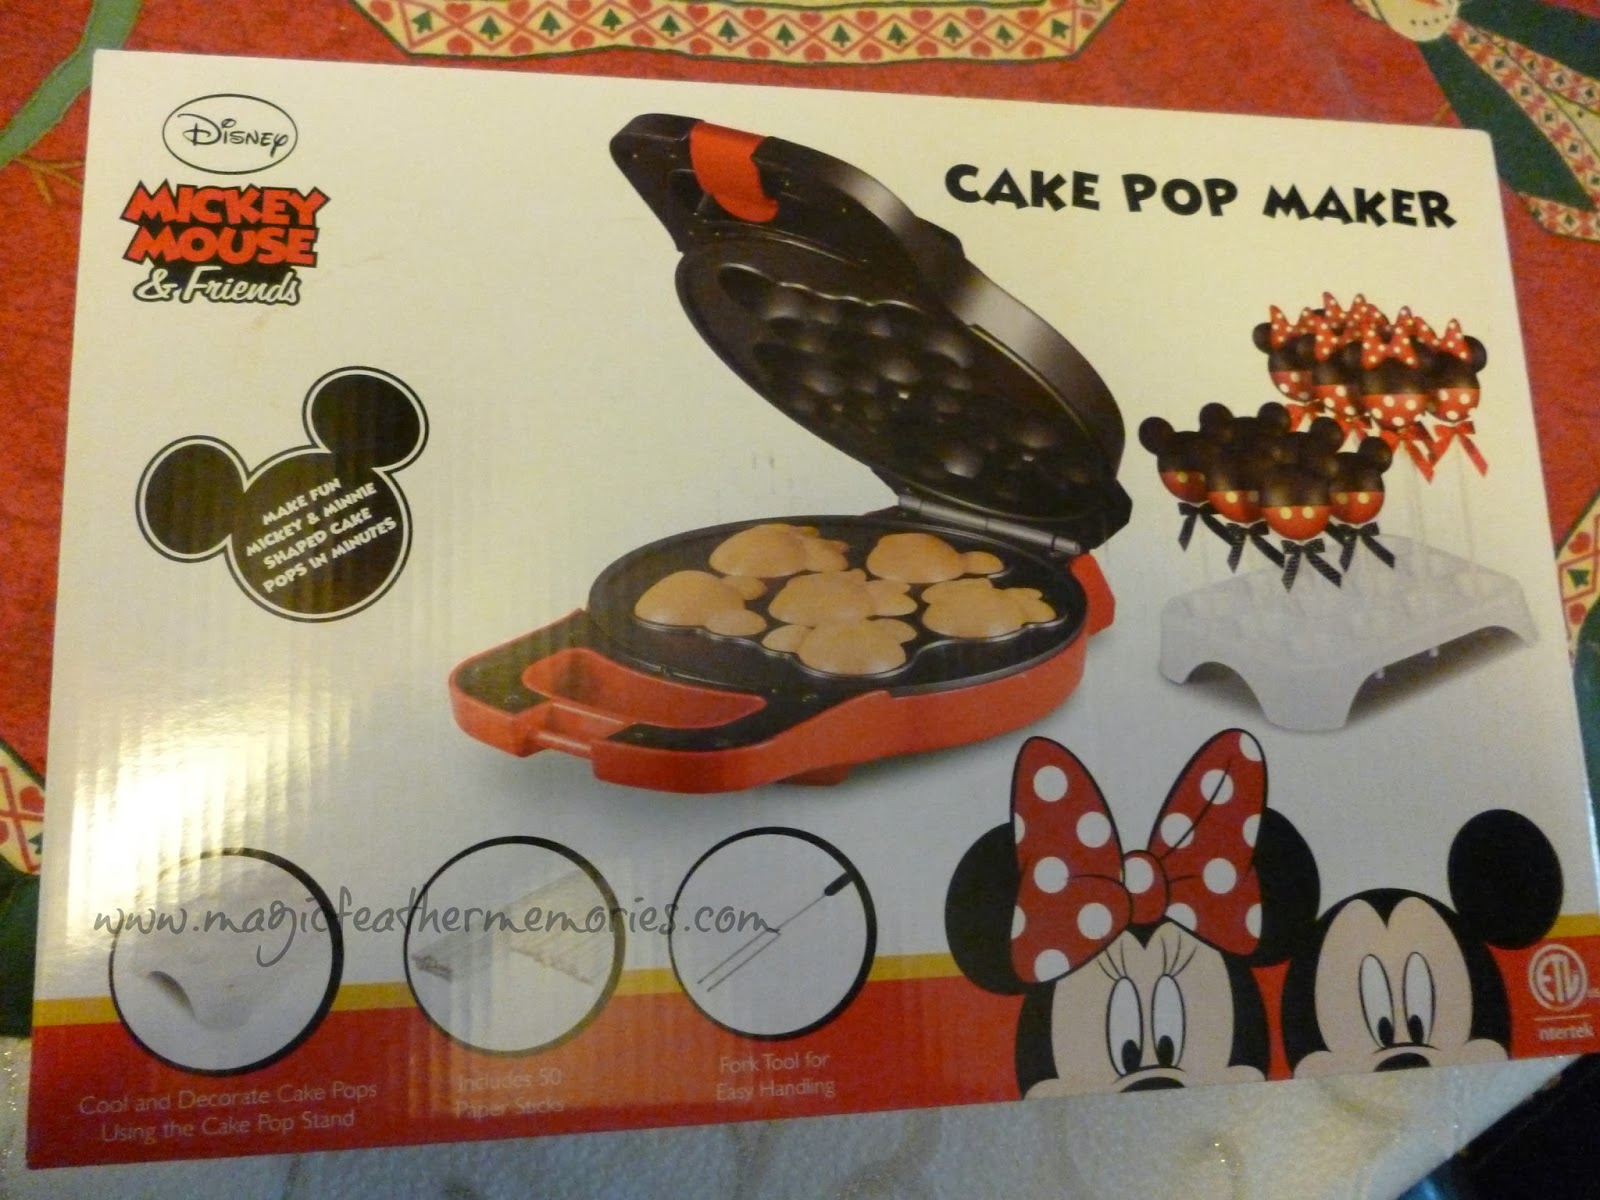 Minnie Mouse Face Disney Waffle Maker